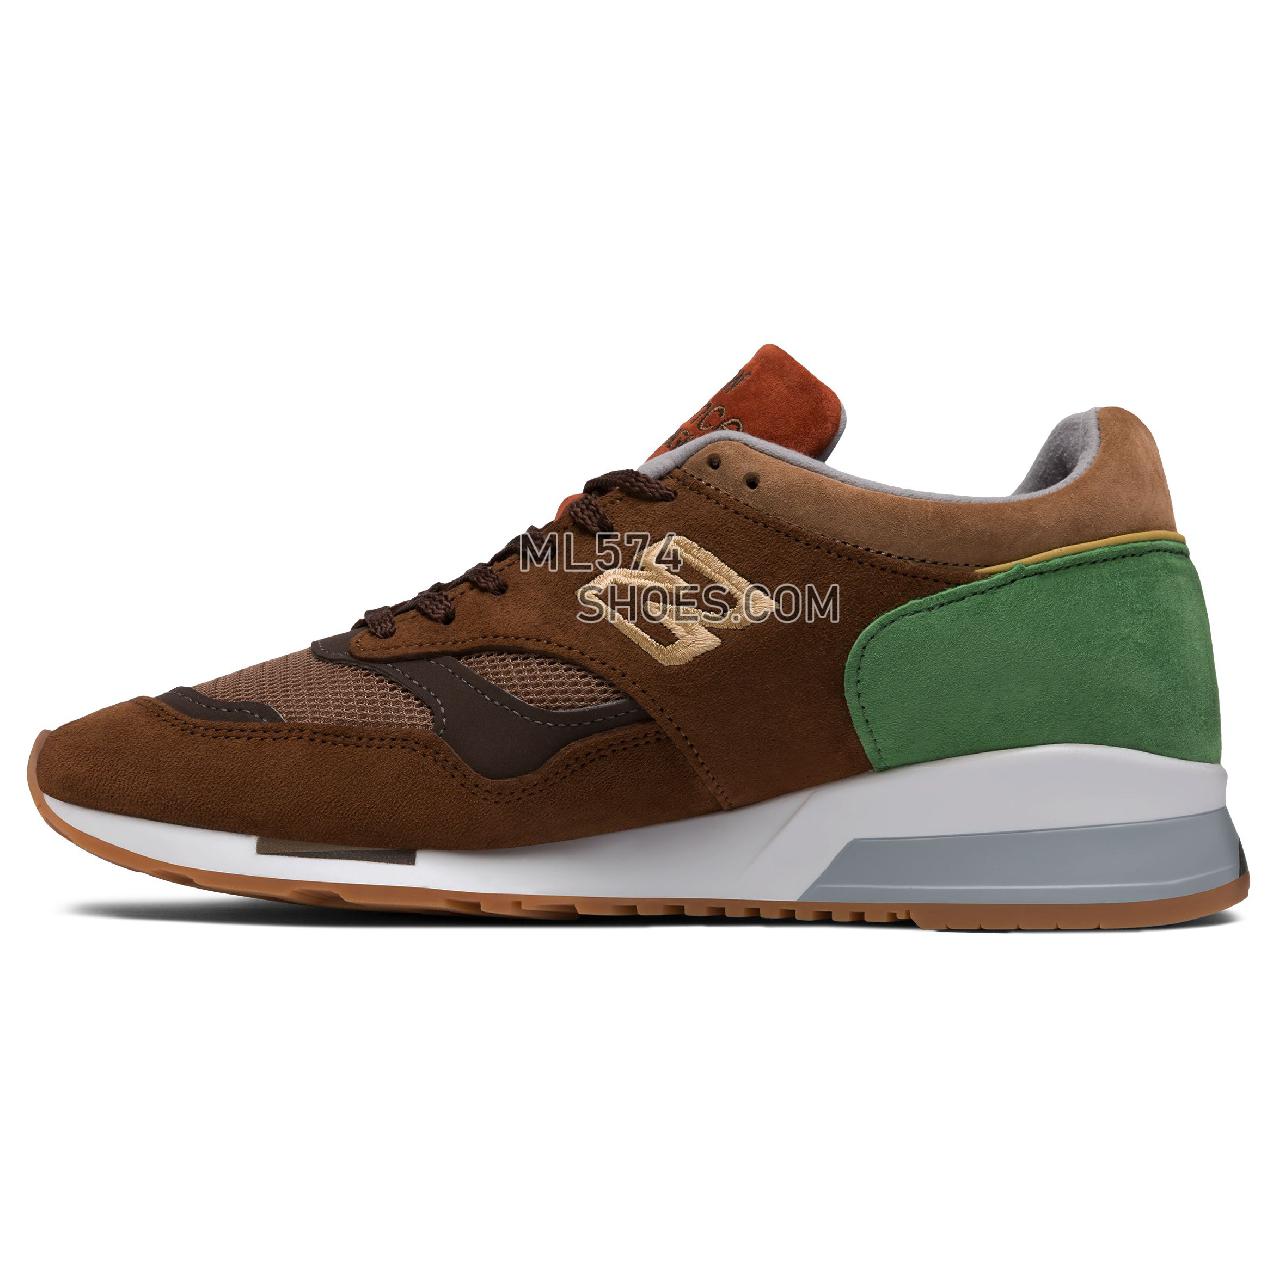 New Balance 1500 Made in UK - Men's 1500 - Classic Brown with Green - M1500LN